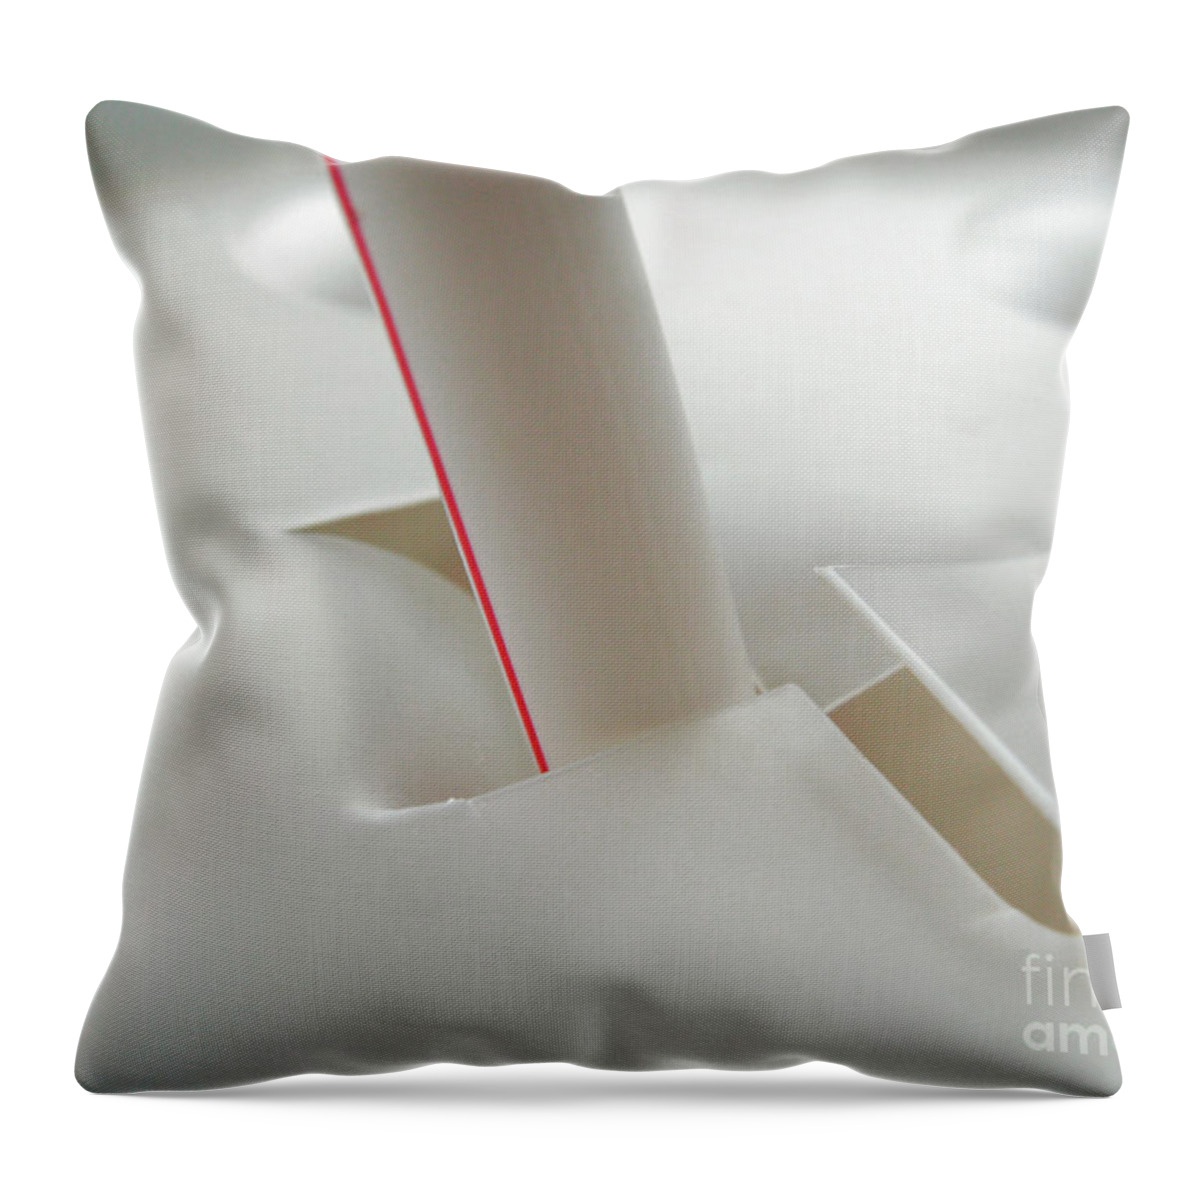 Carryout Throw Pillow featuring the photograph Drinking Straw through Top of Carryout Cup by William Kuta